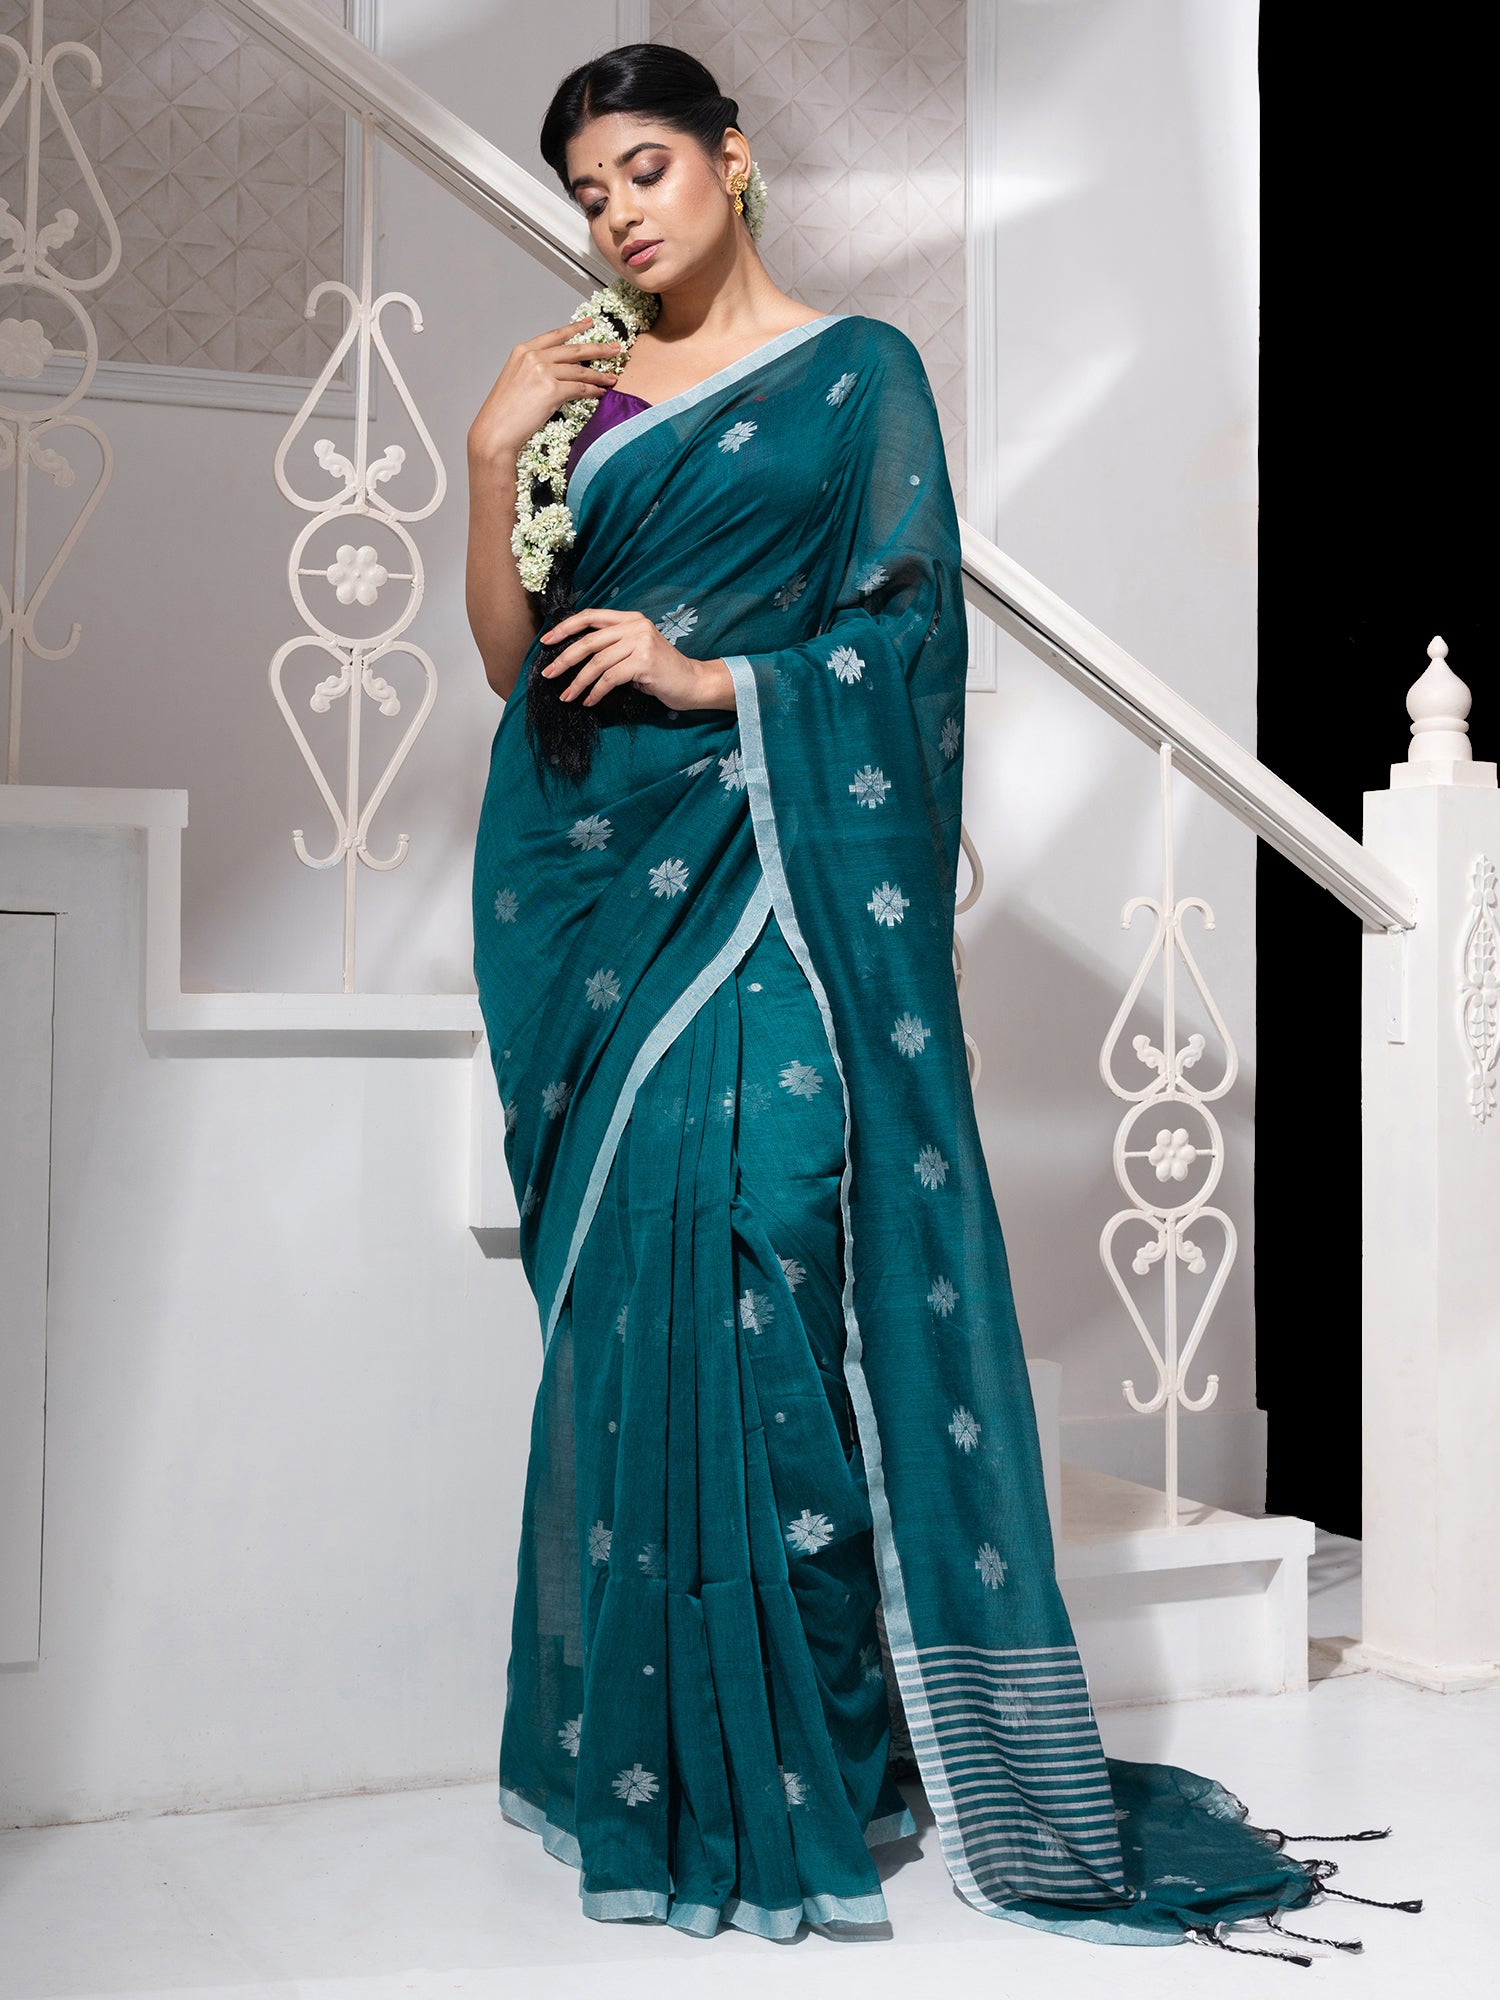 Women's Teal Green Cotton Handloom Saree With White Flower Butta - In Weave Sarees